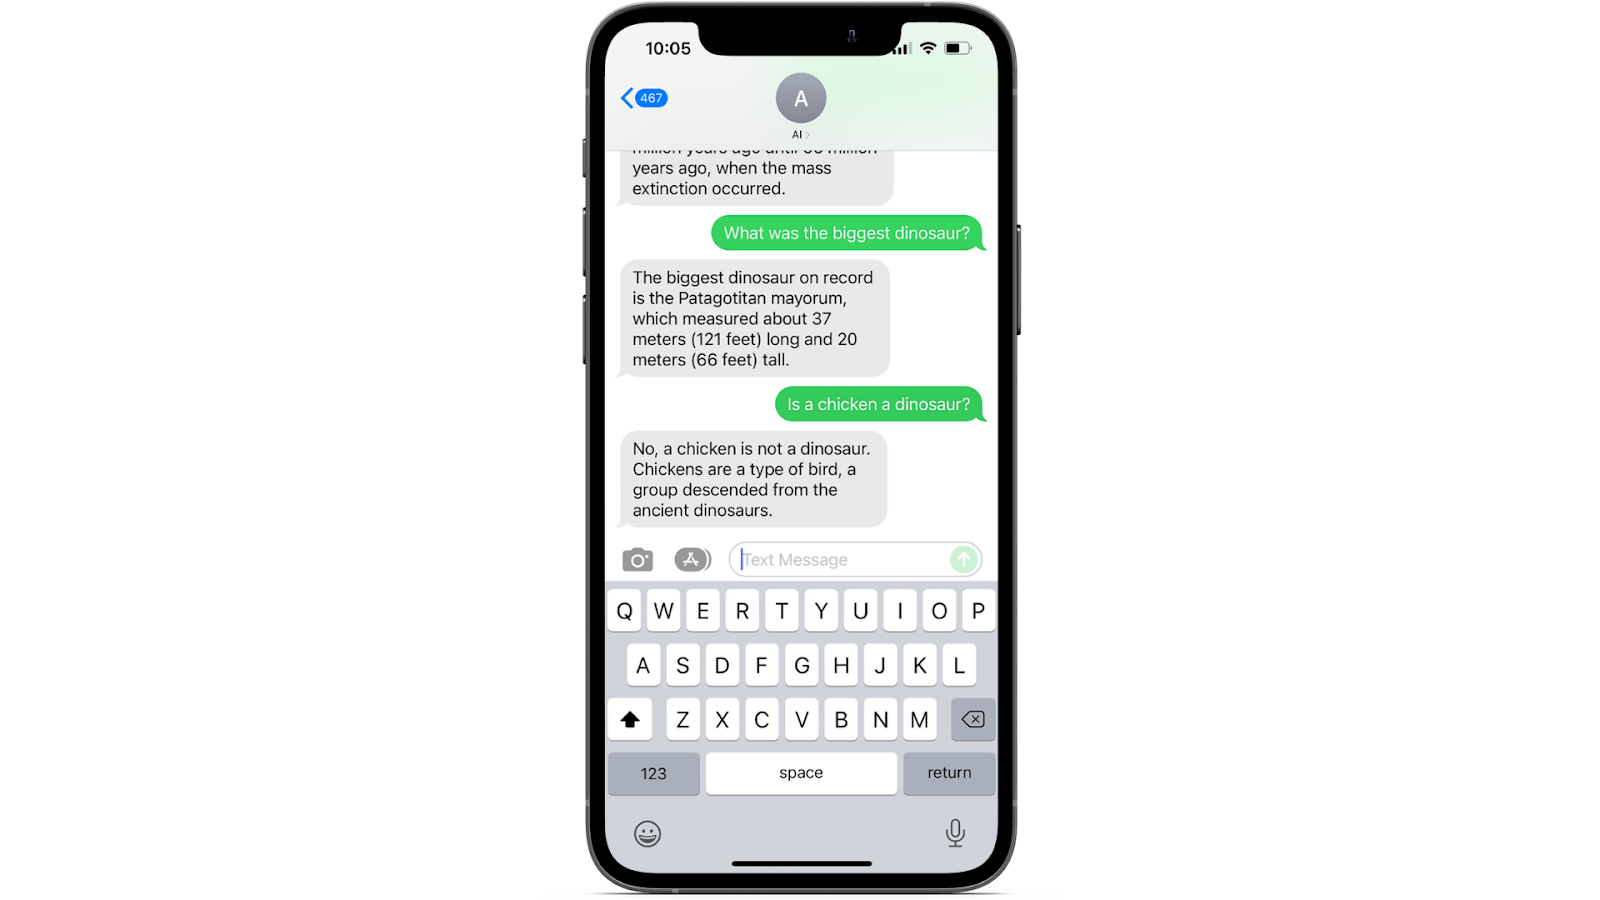 Iphone screenshot showing conversation with AI assistant